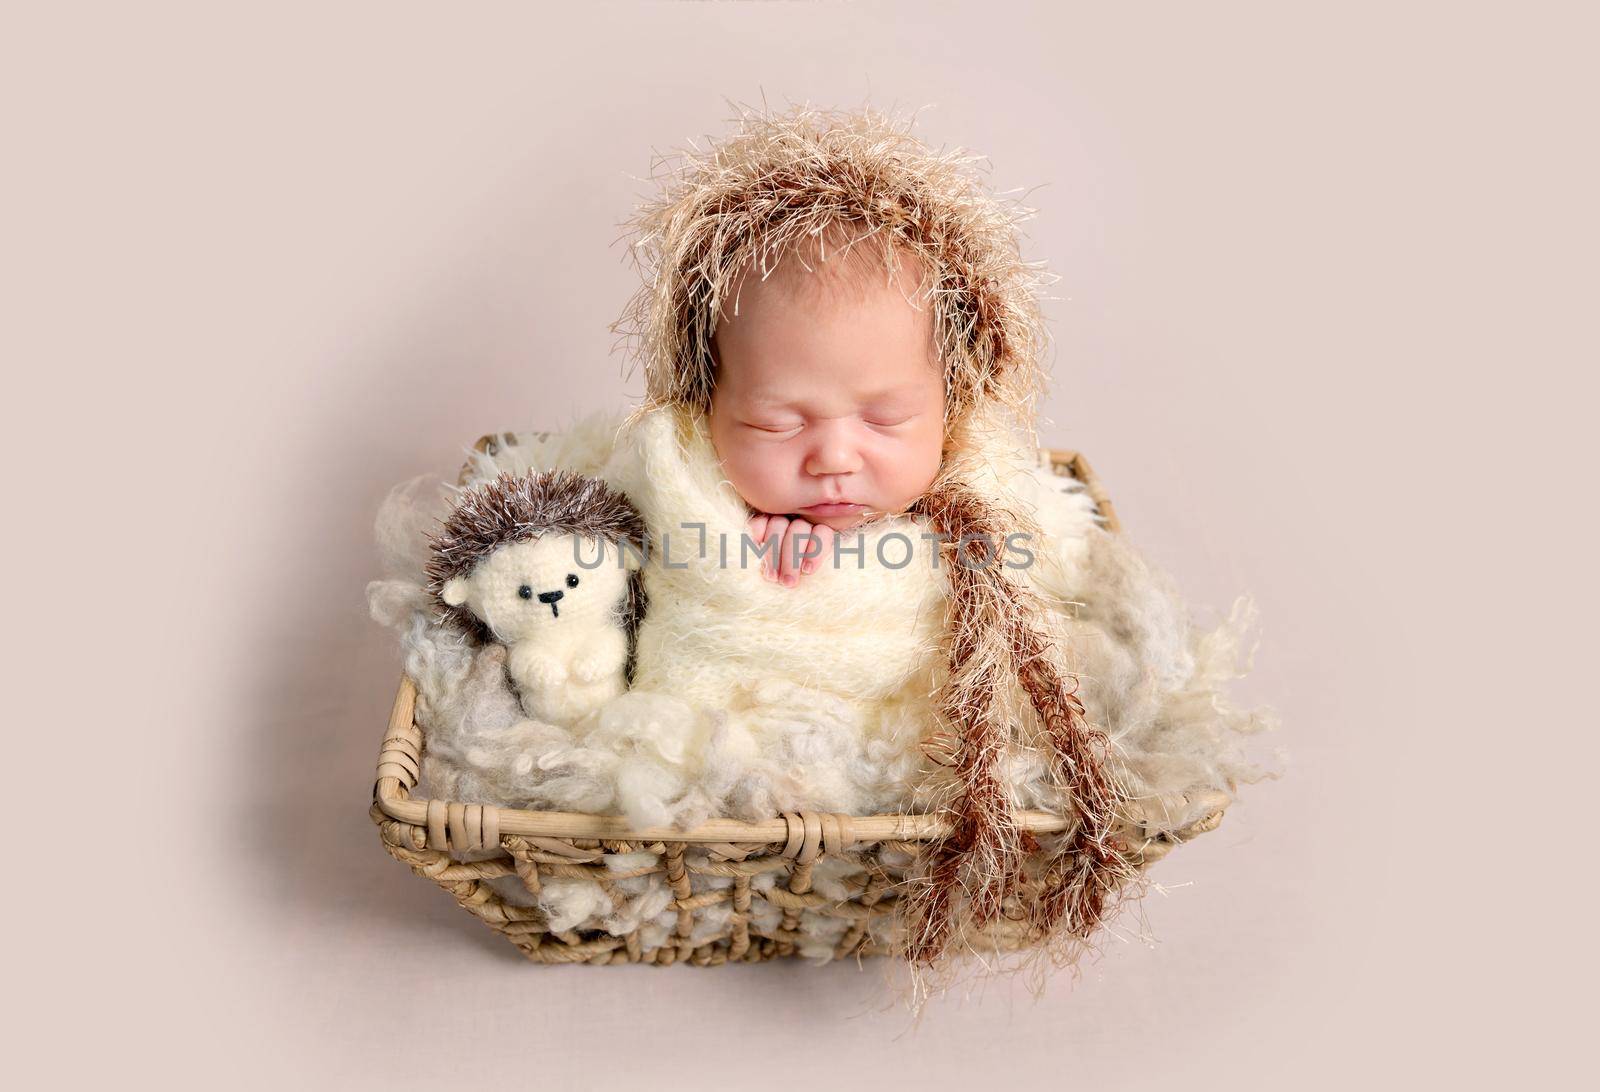 Charming little newborn baby with chubby cheeks sleeping happily in basket with soft toys. Babby wrapped in soft knitted scarf